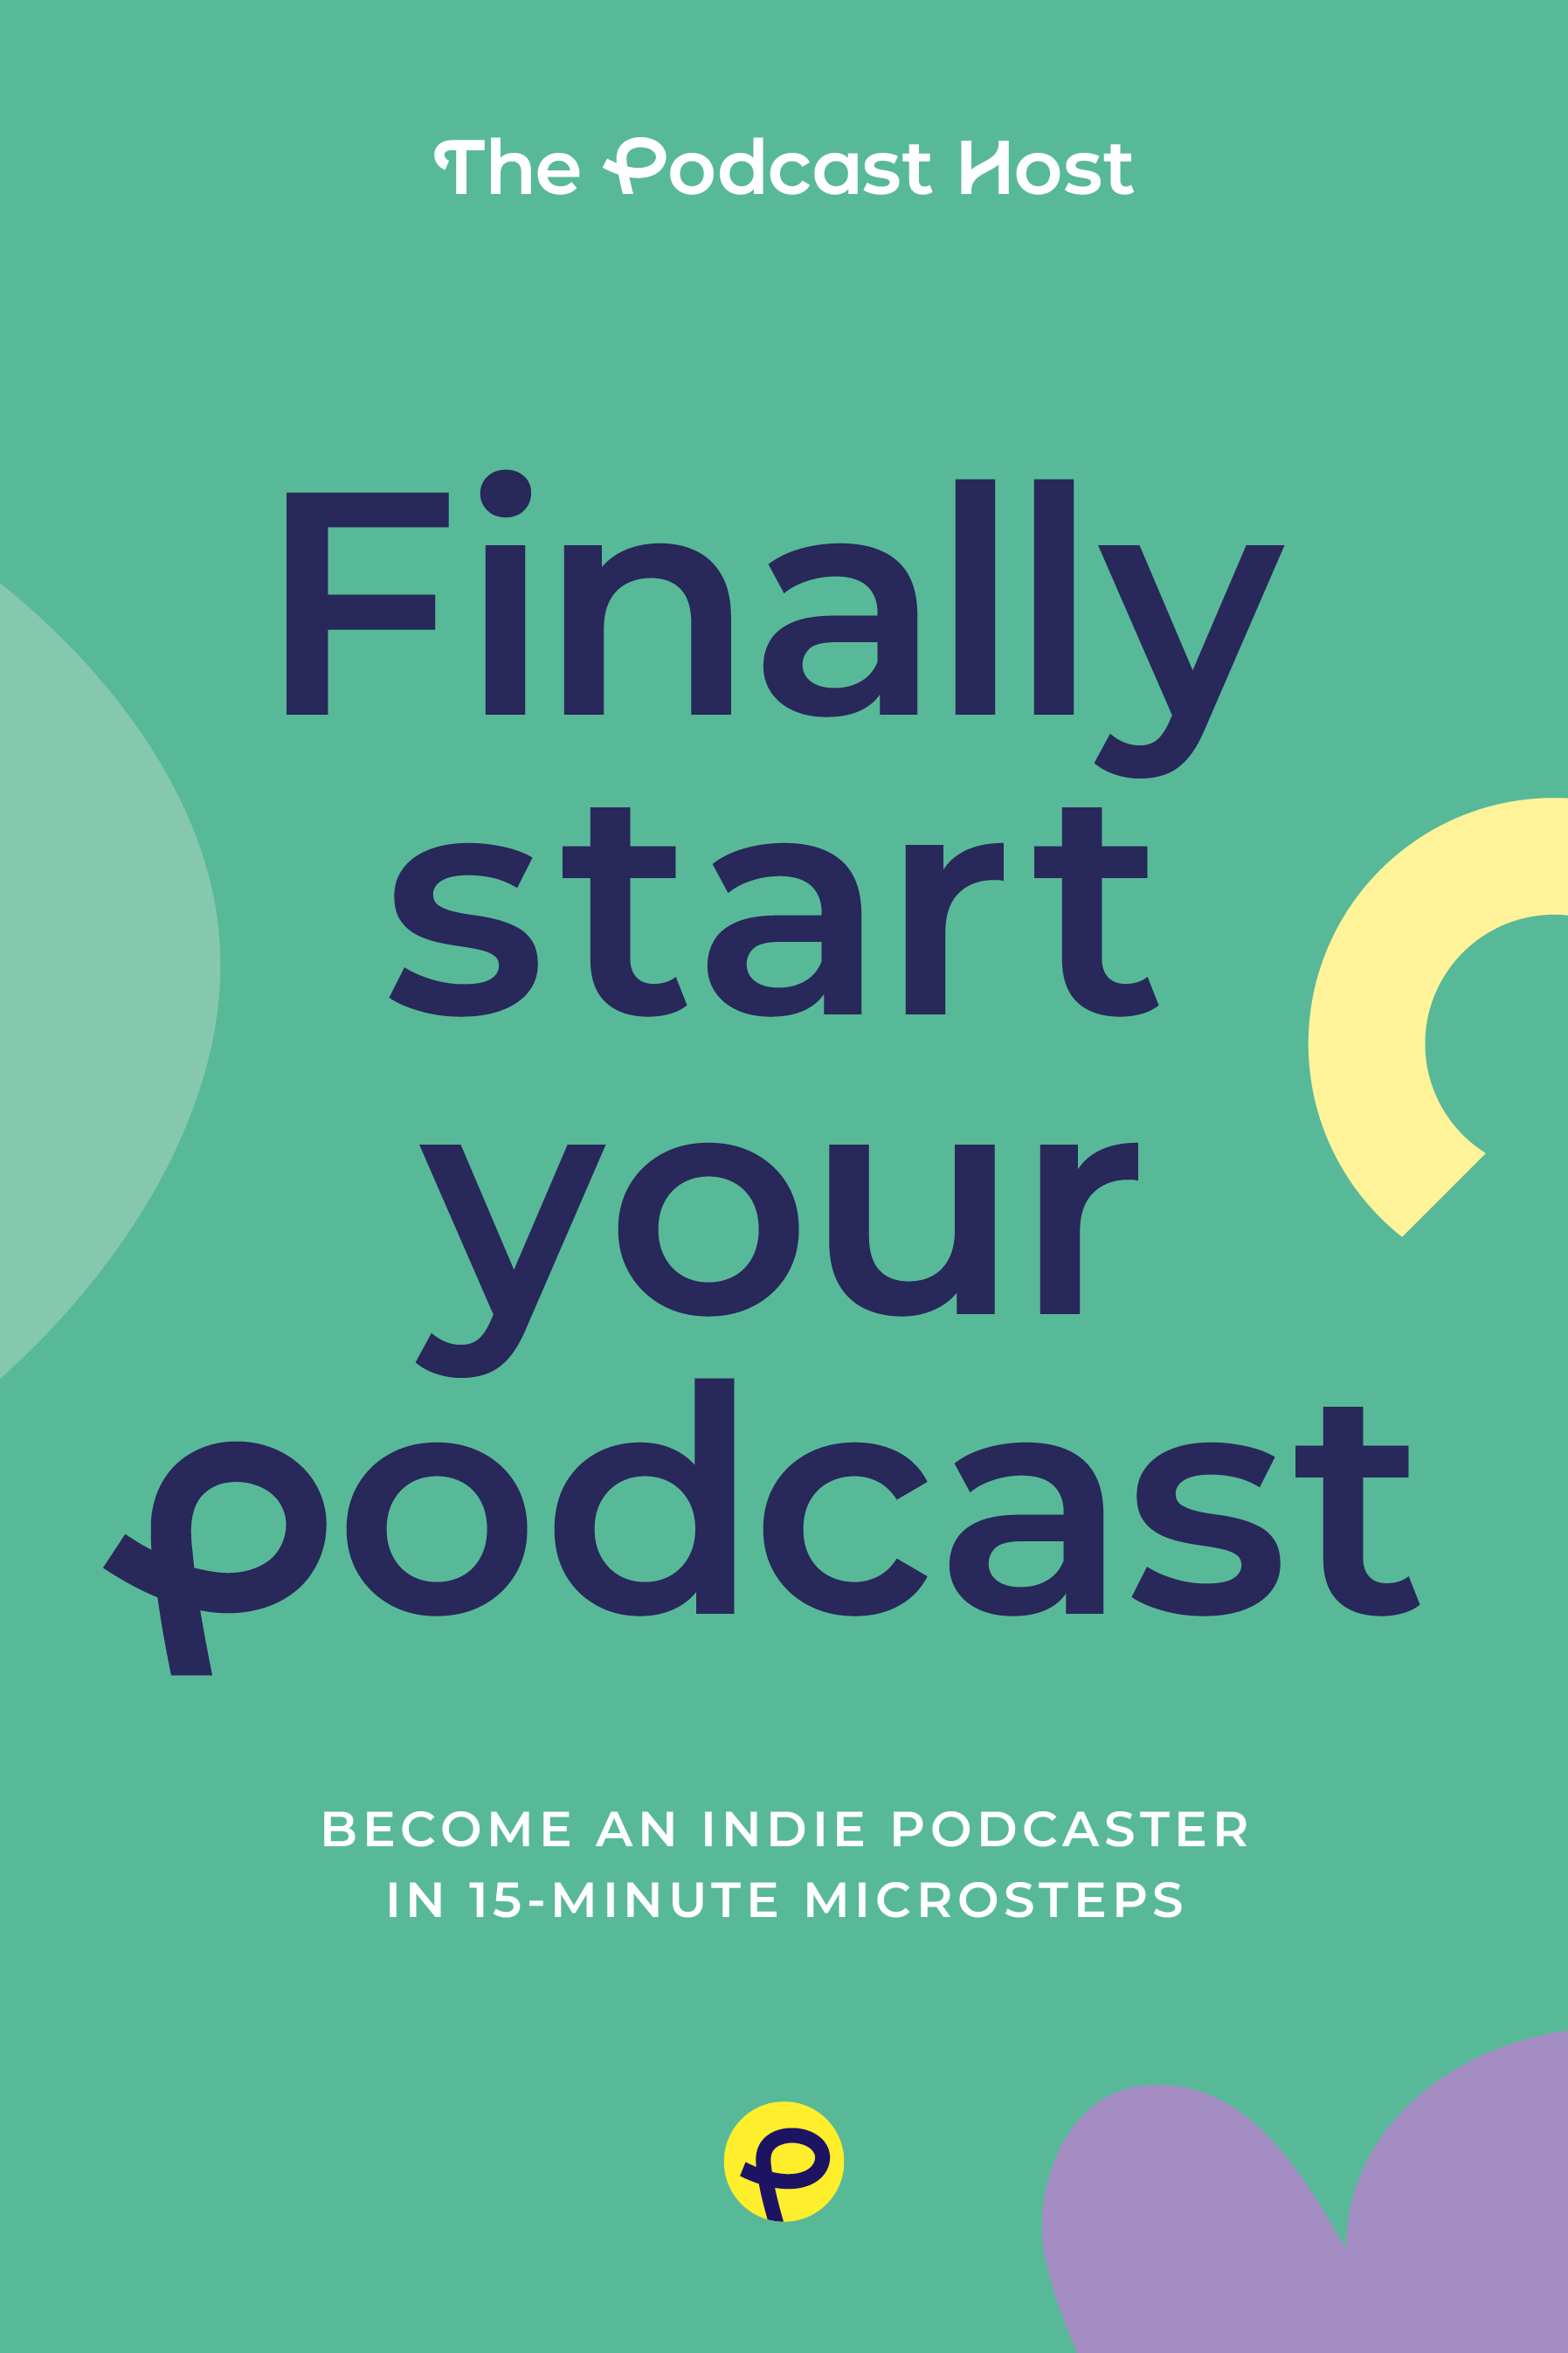 Thumbnail for item called: 'Finally Start Your Podcast: Become an Indie Podcaster in 15-minute Microsteps'